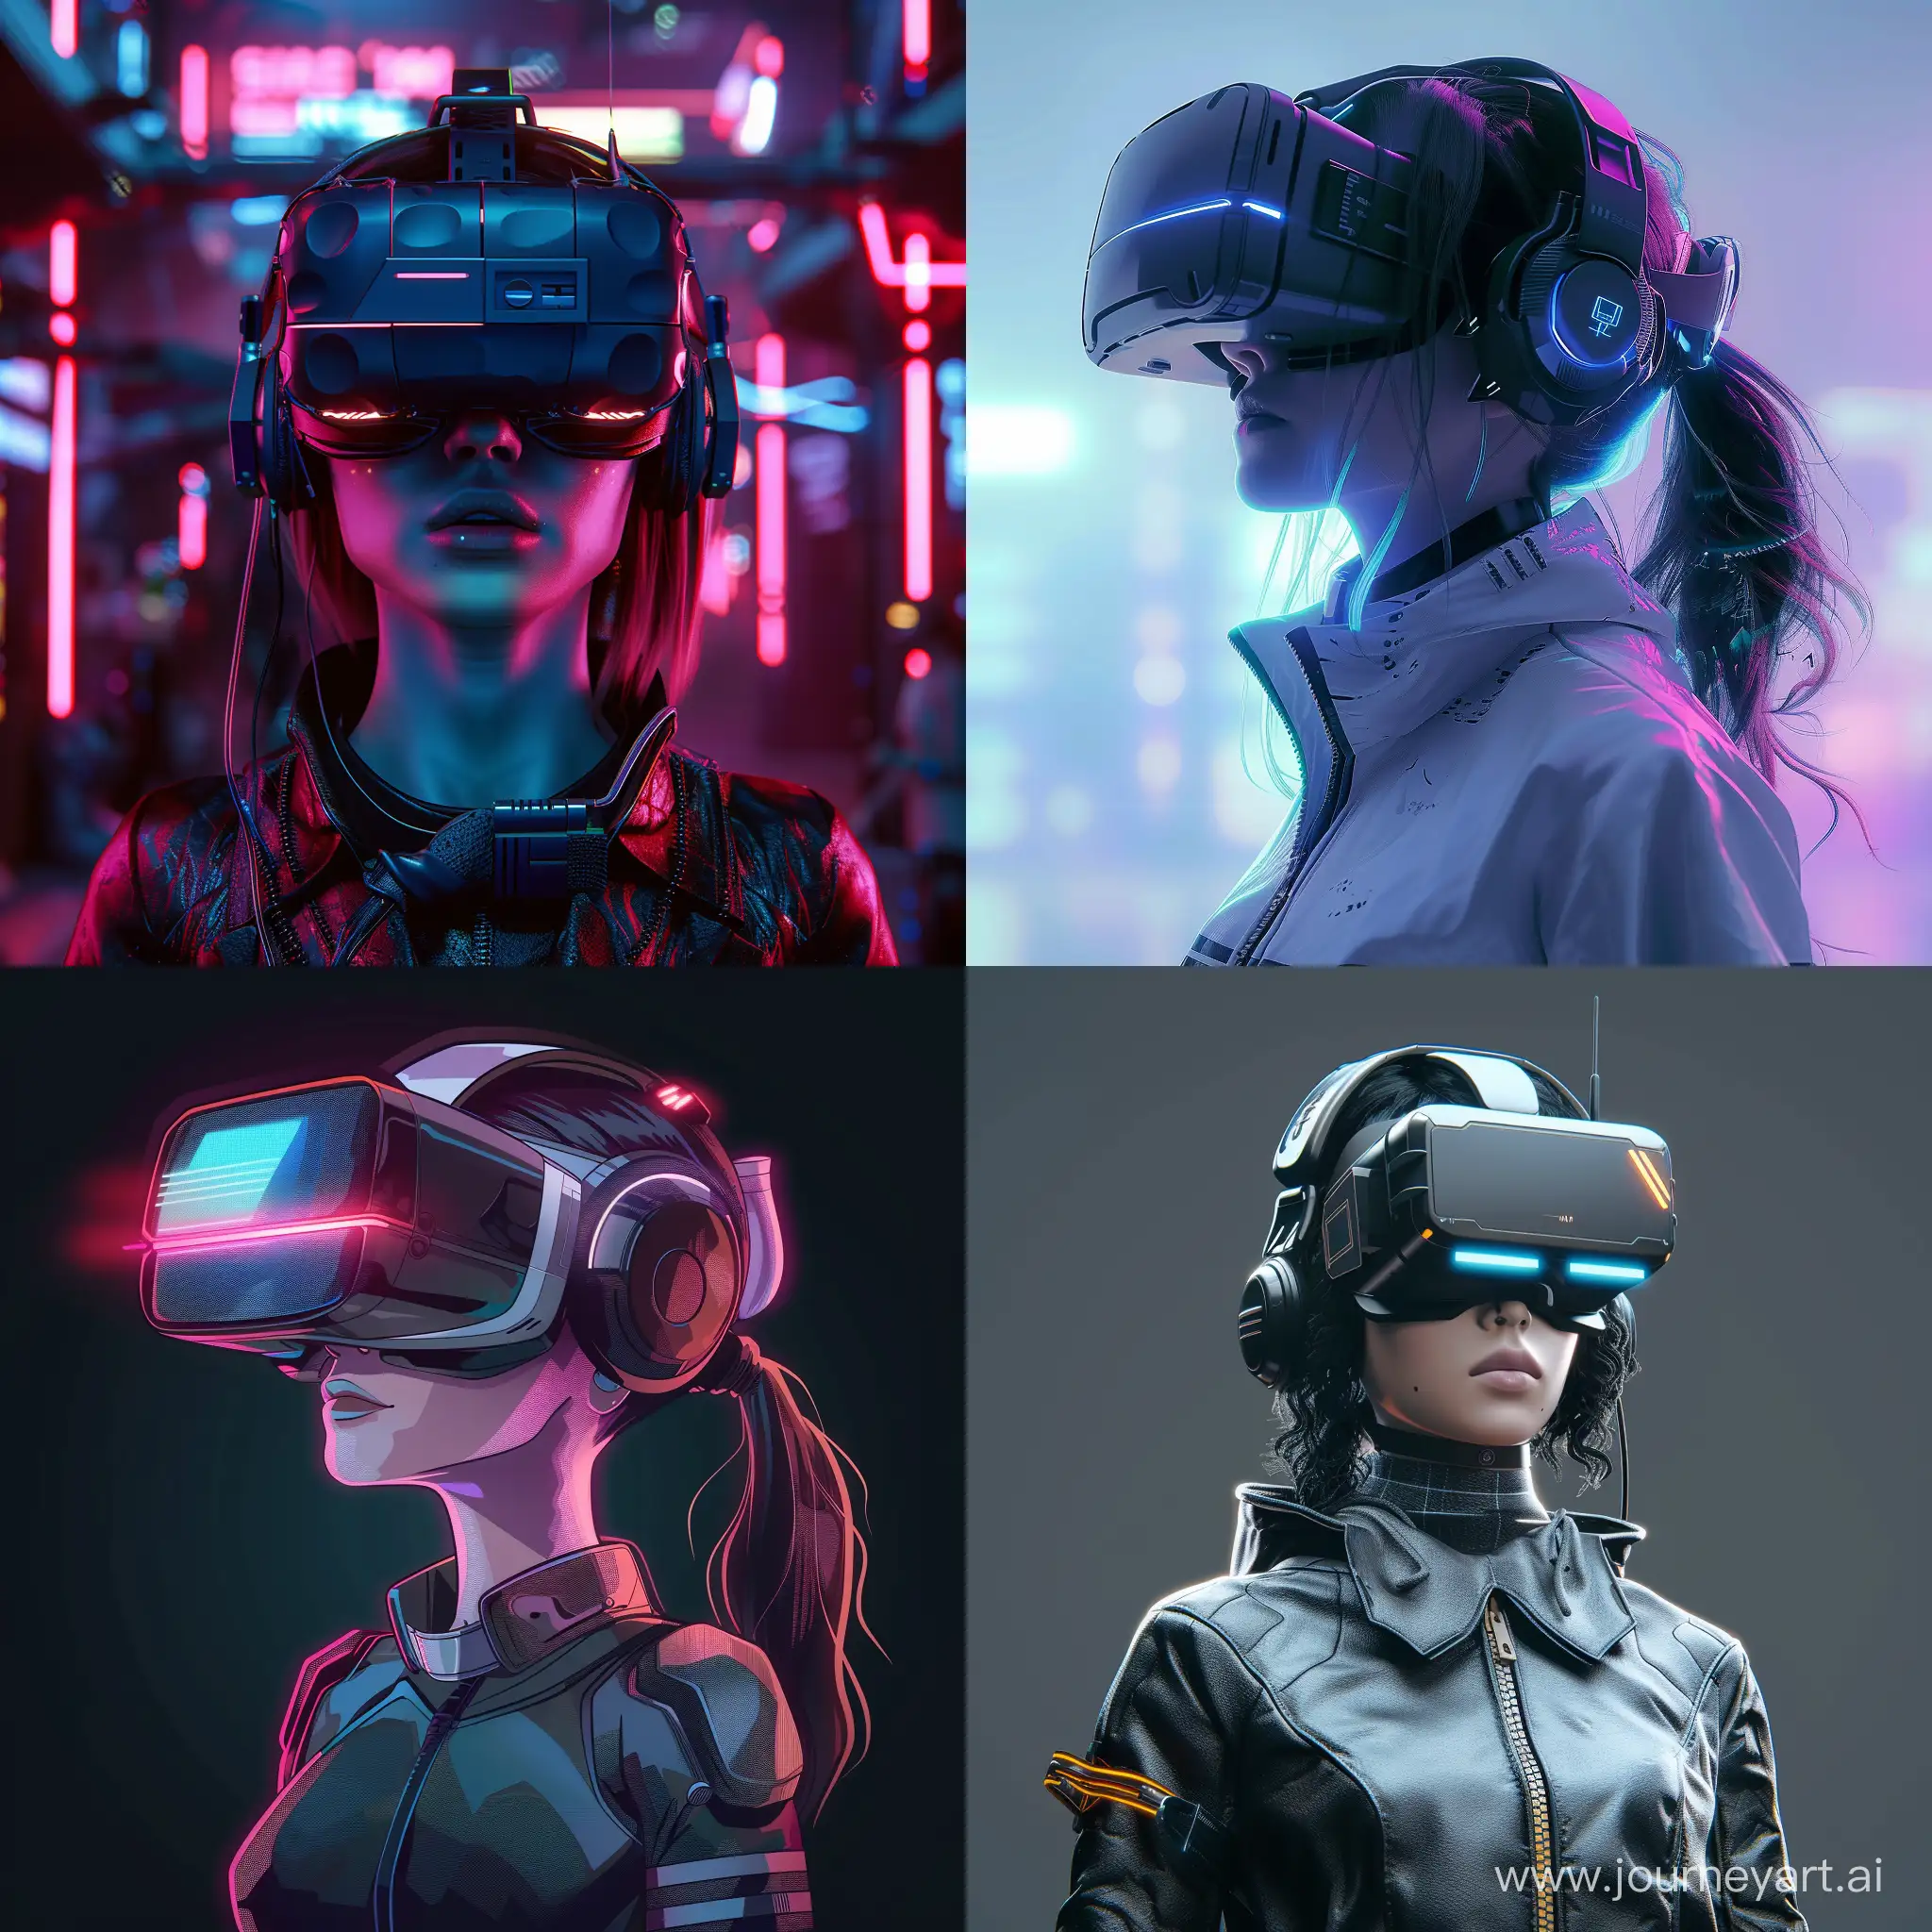 Futuristic-Cyberpunk-Girl-Immersed-in-Virtual-Reality-Experience